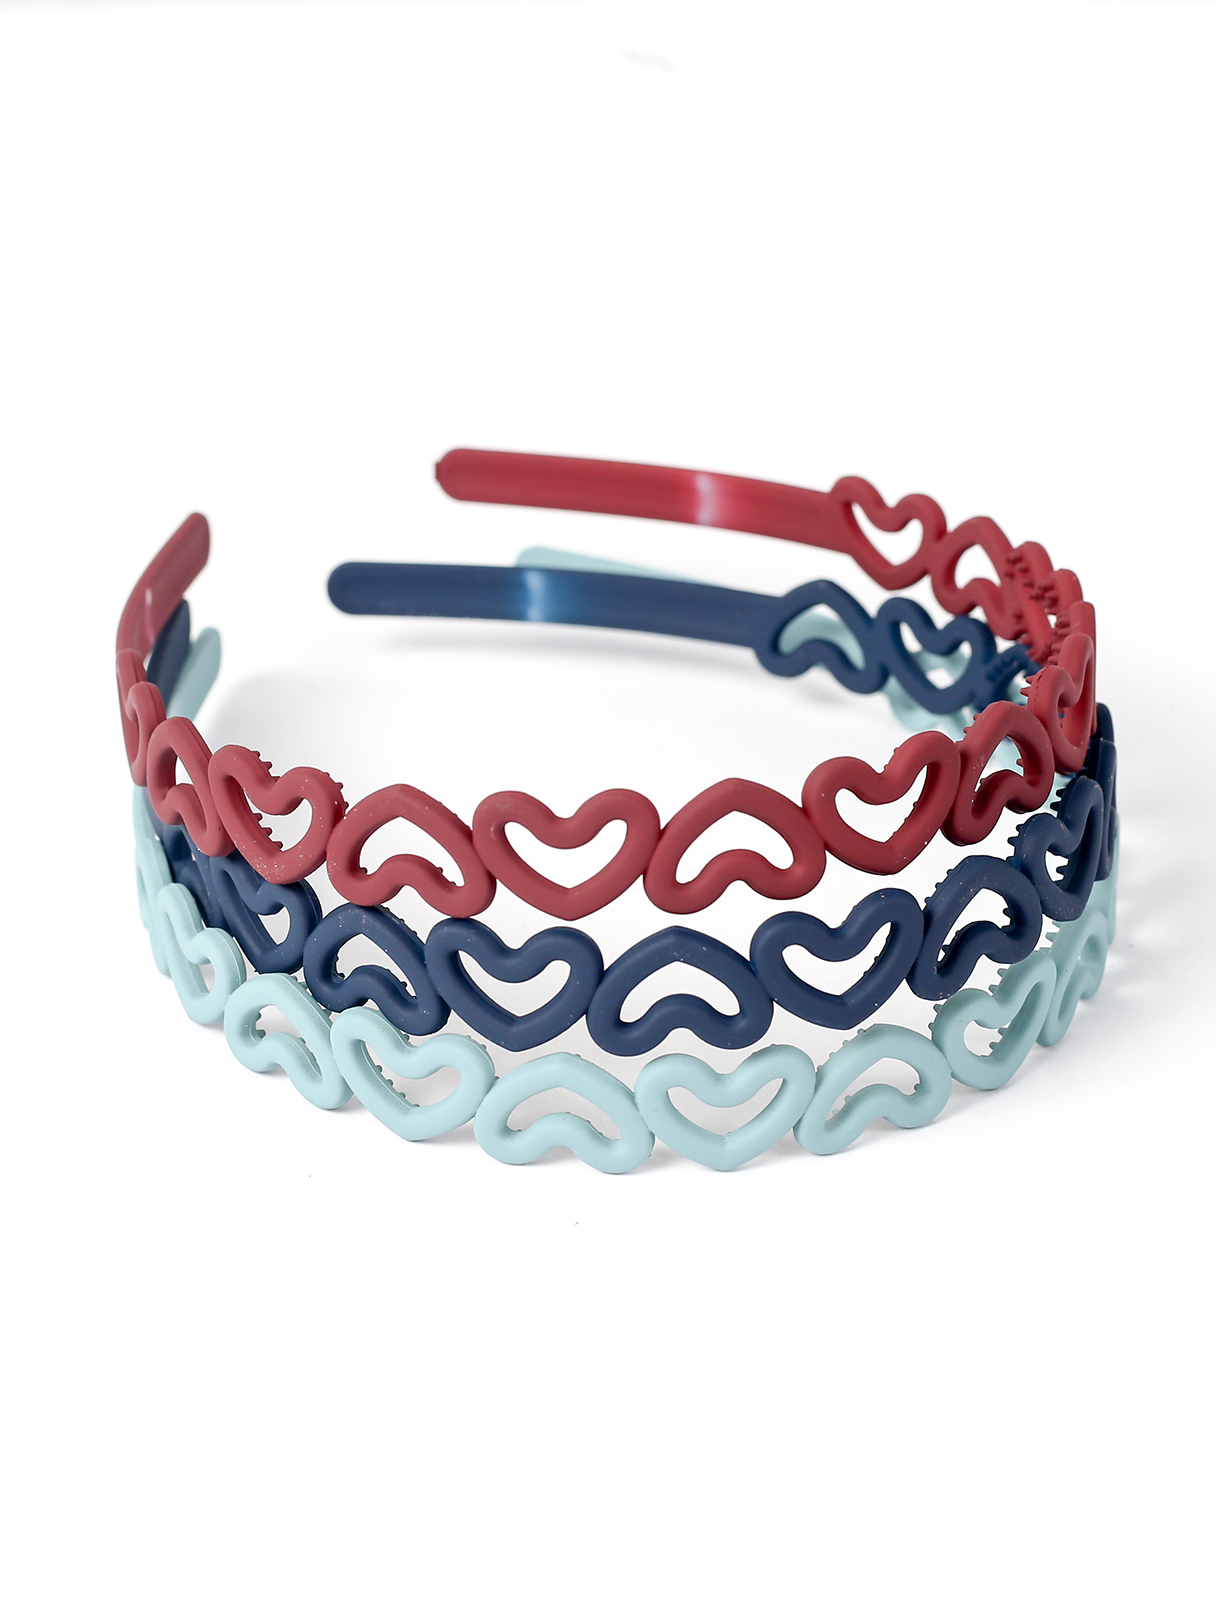 Hair hoop in the shape of hearts in contrasting colors